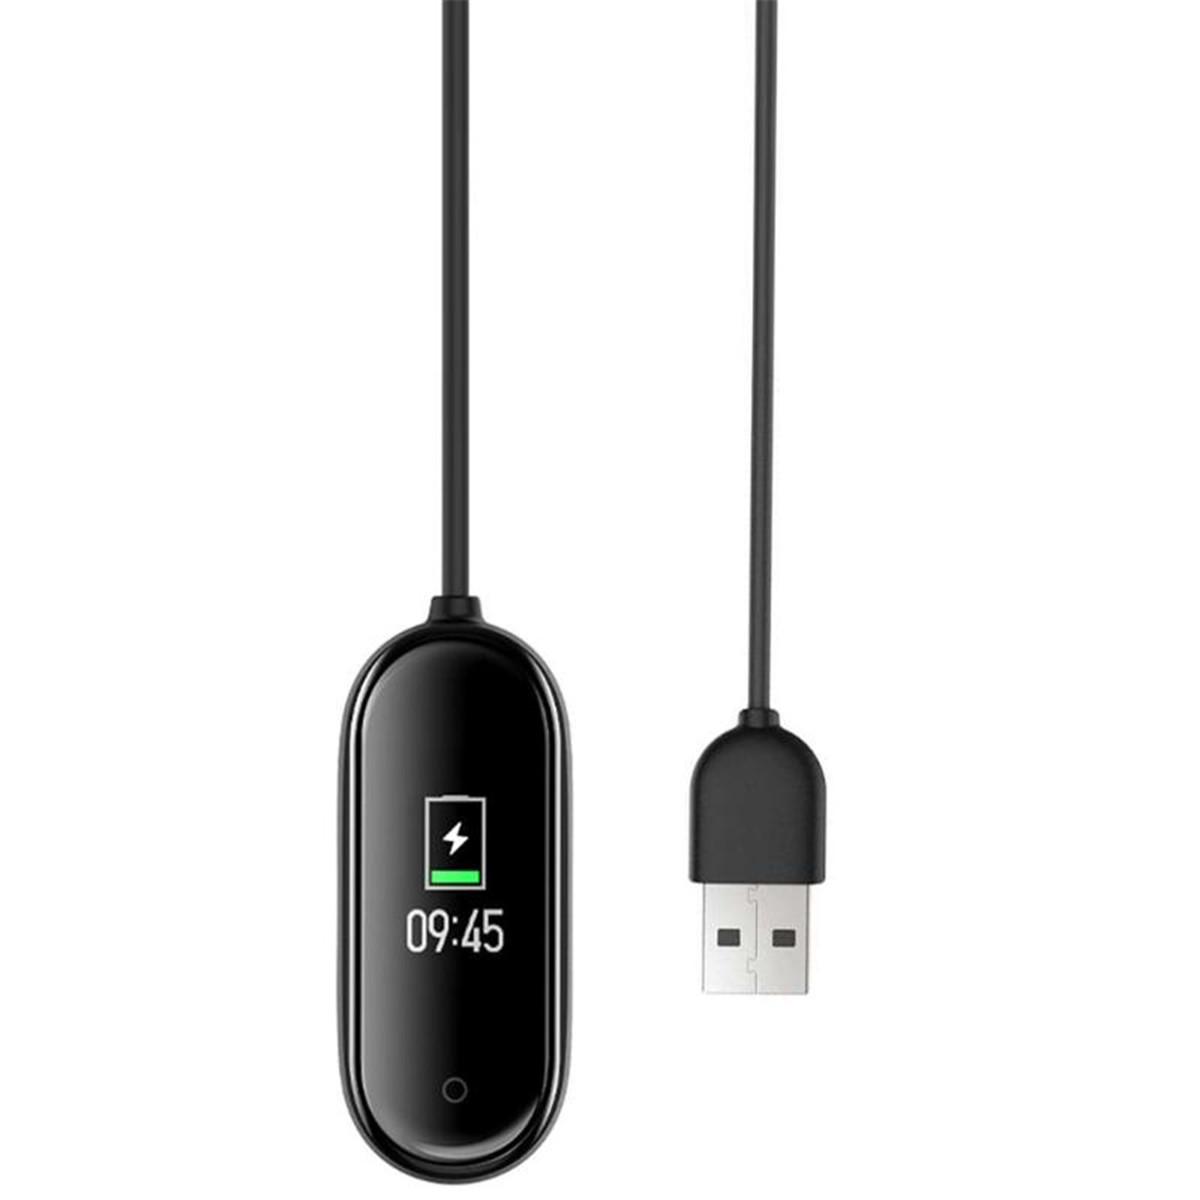 Find Original Watch Charger Charging Cable Watch Cable for Xiaomi Miband 4 Non original for Sale on Gipsybee.com with cryptocurrencies